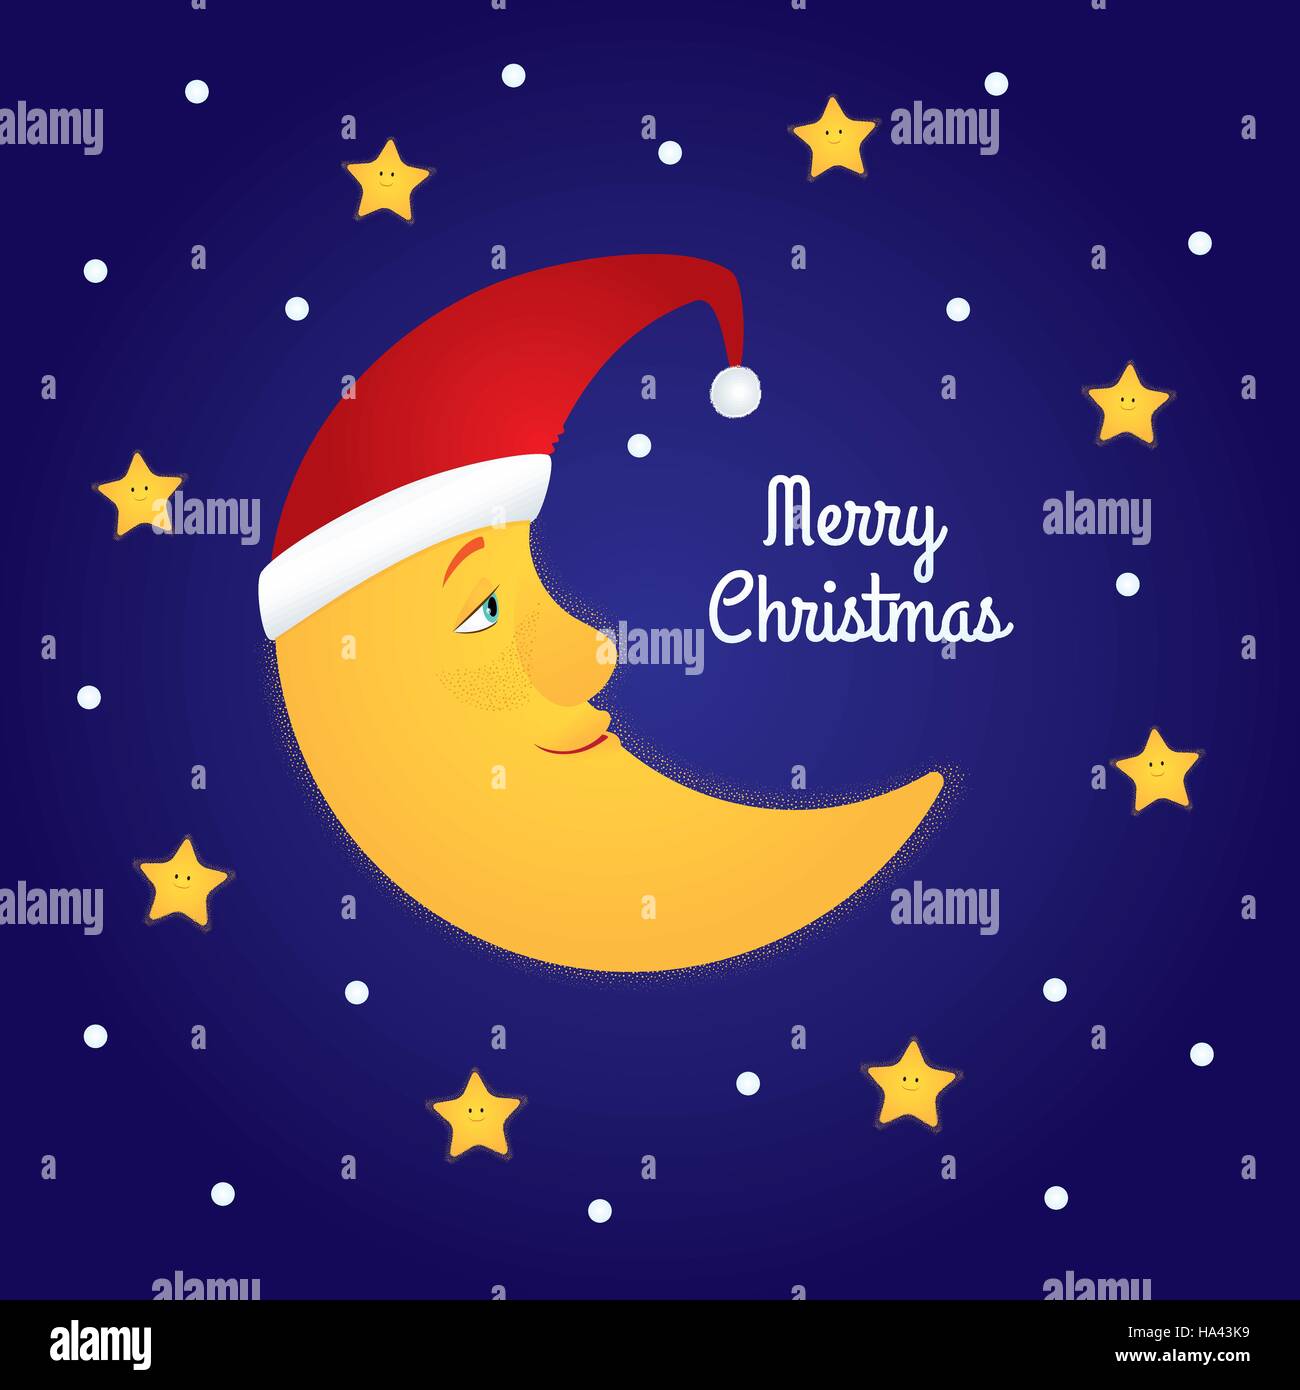 Holiday greeting card. Vector cartoon illustration of a half moon in a Santa hat among stars. Dark blue background, text 'Merry Christmas'. Square for Stock Vector